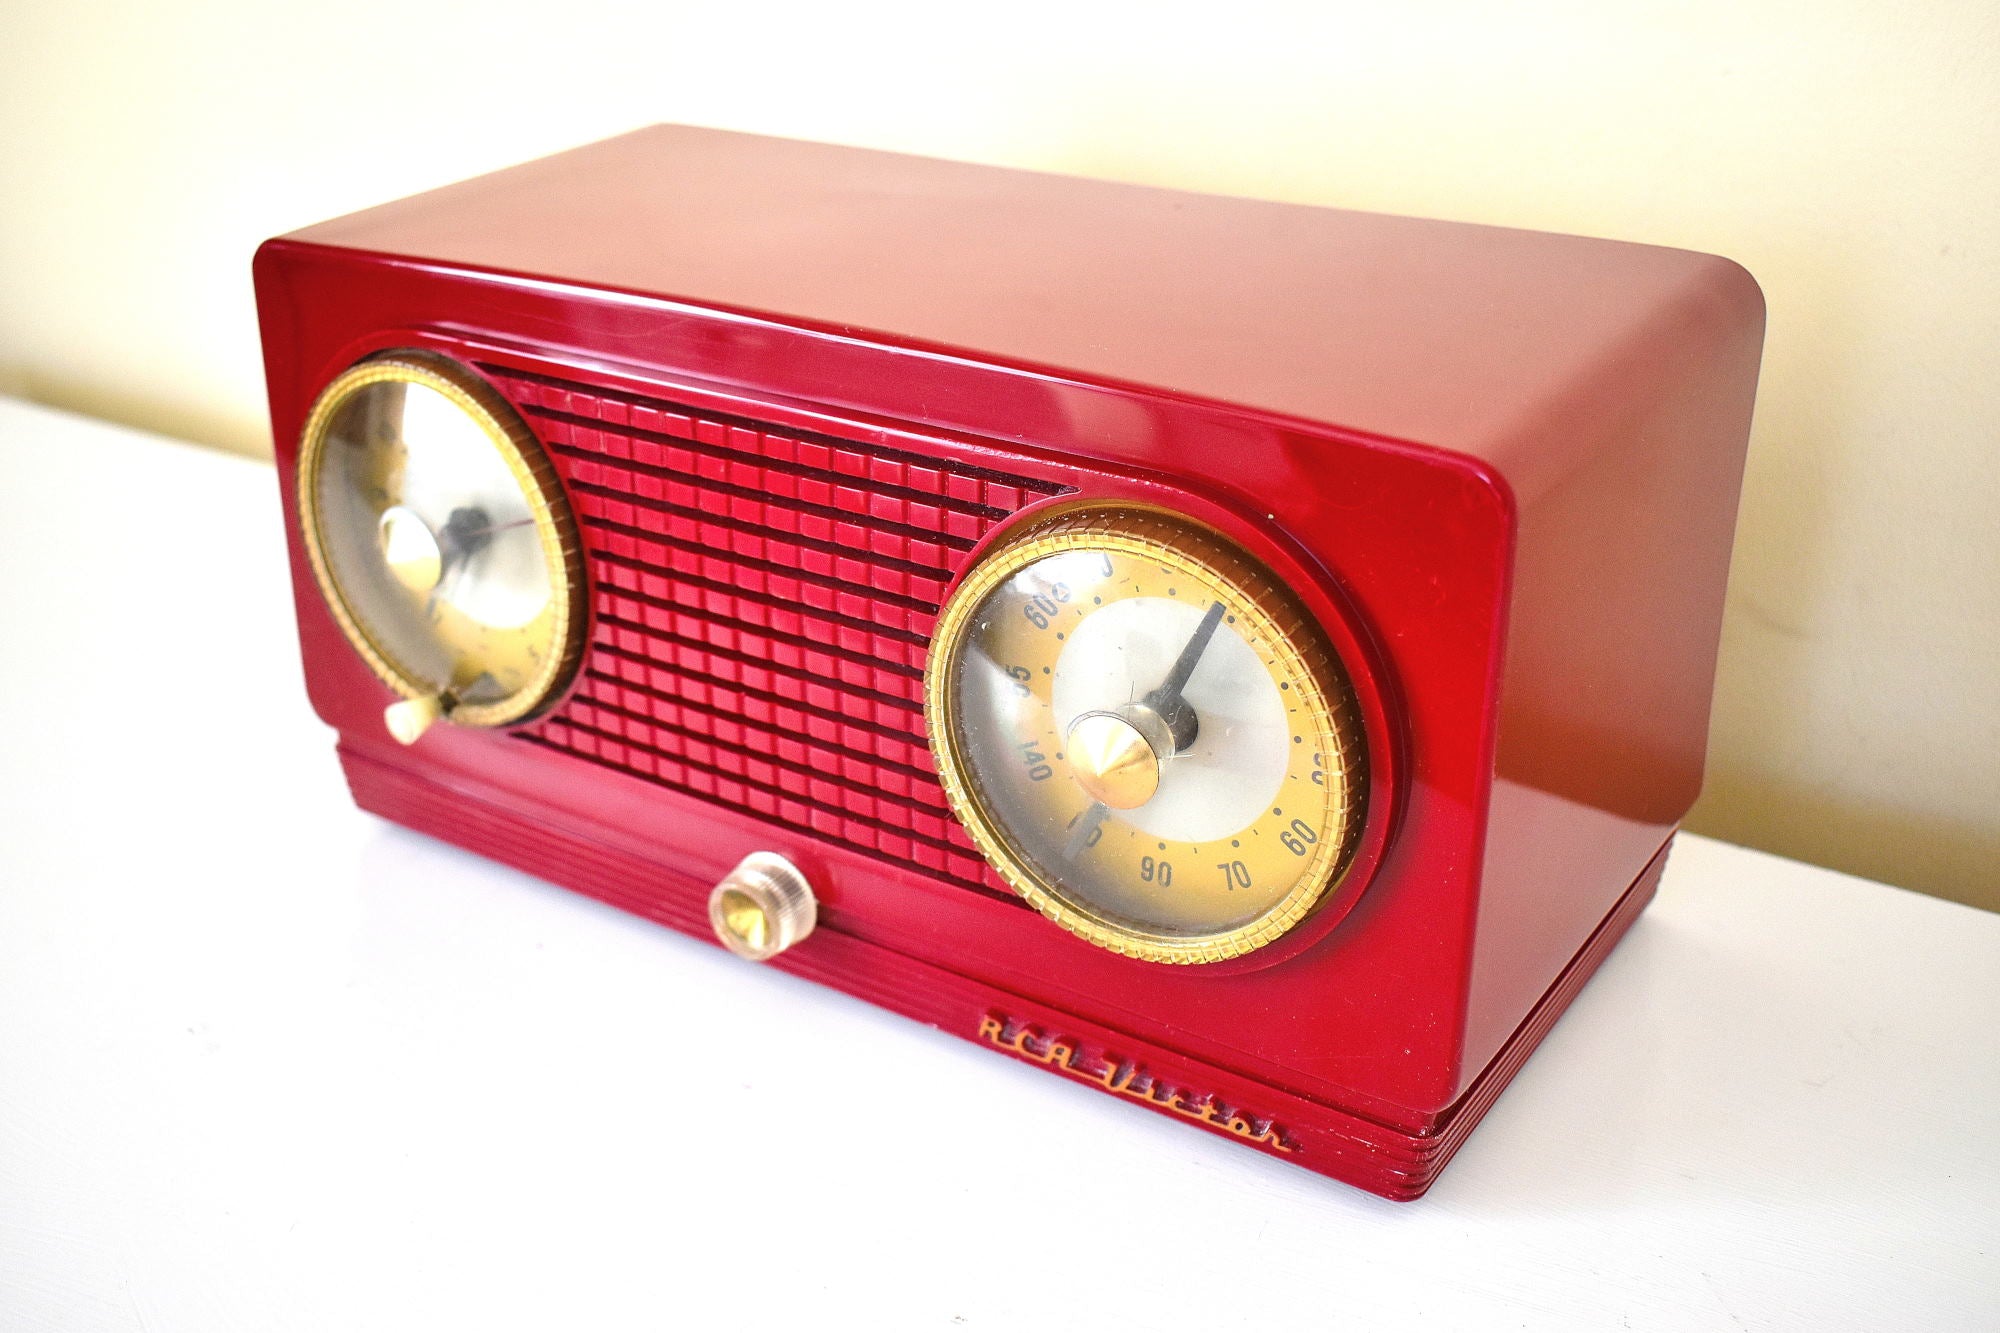 Candy Apple Red 1954 RCA Victor Model 4-C-534 AM Vacuum Tube Radio Sounds Great! Excellent Condition!